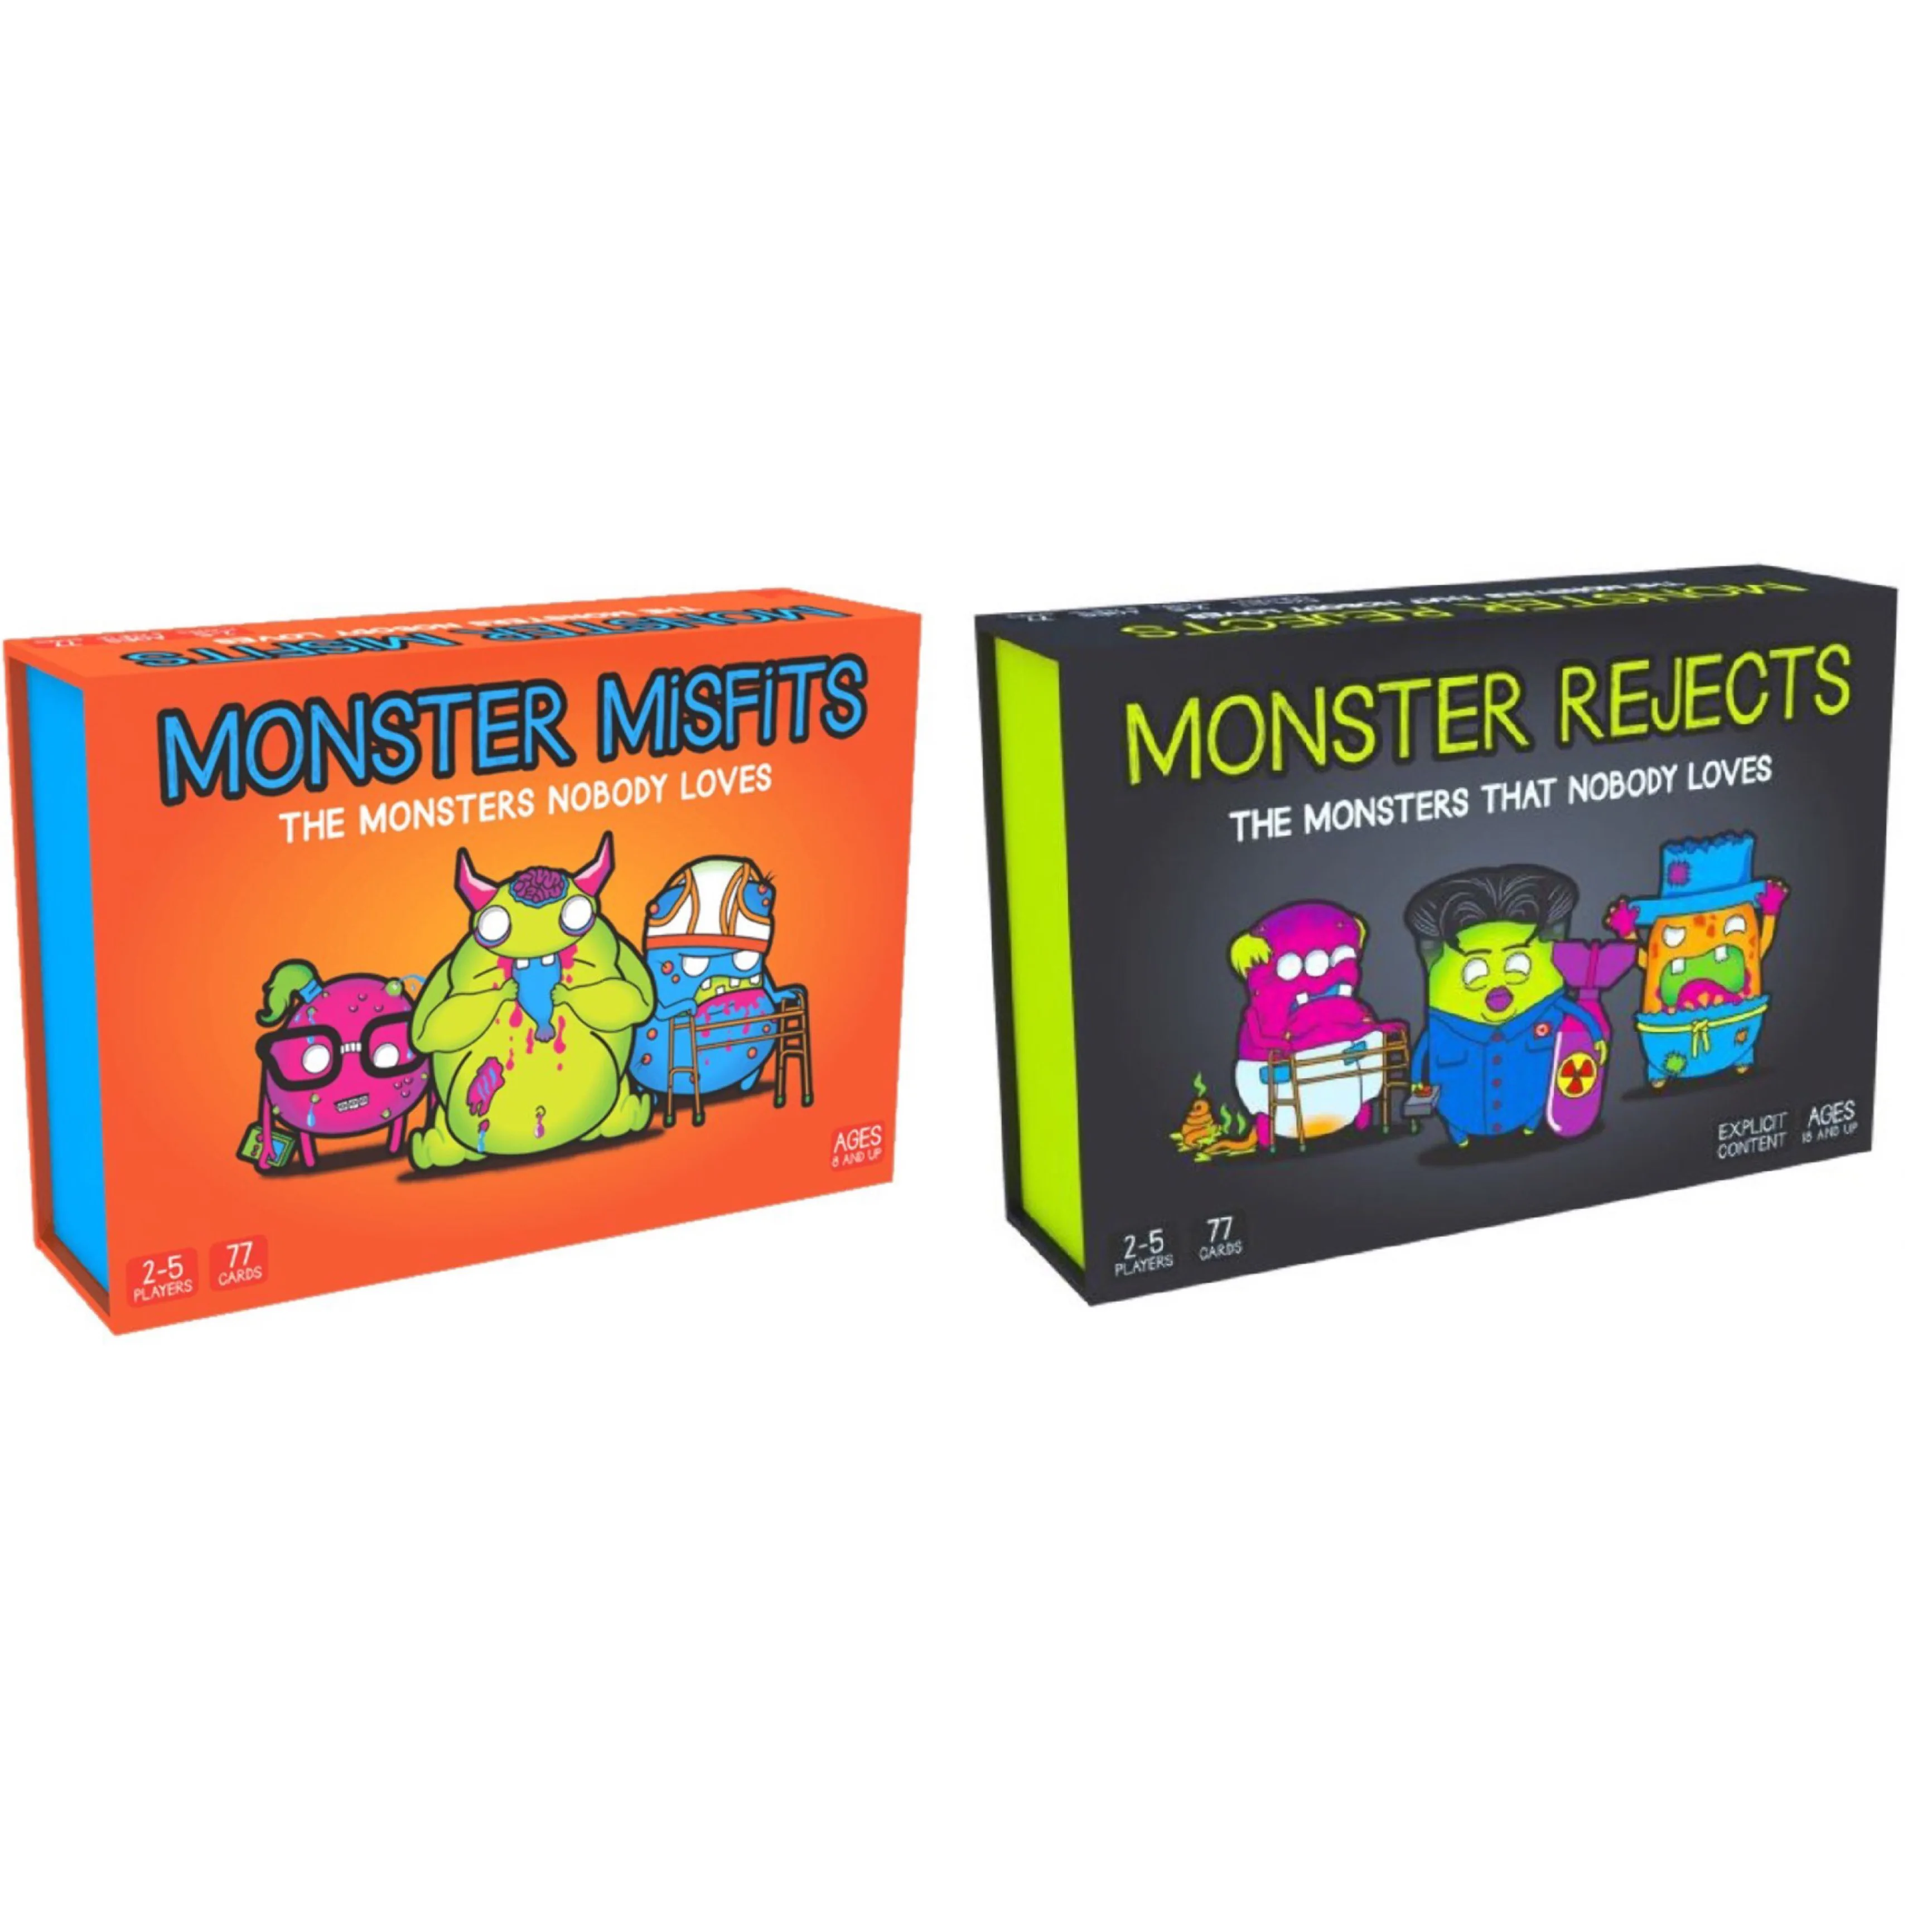 Monster Rejects NSFW Edition Monster Misfits Ridiculous Card Board Games for Adults